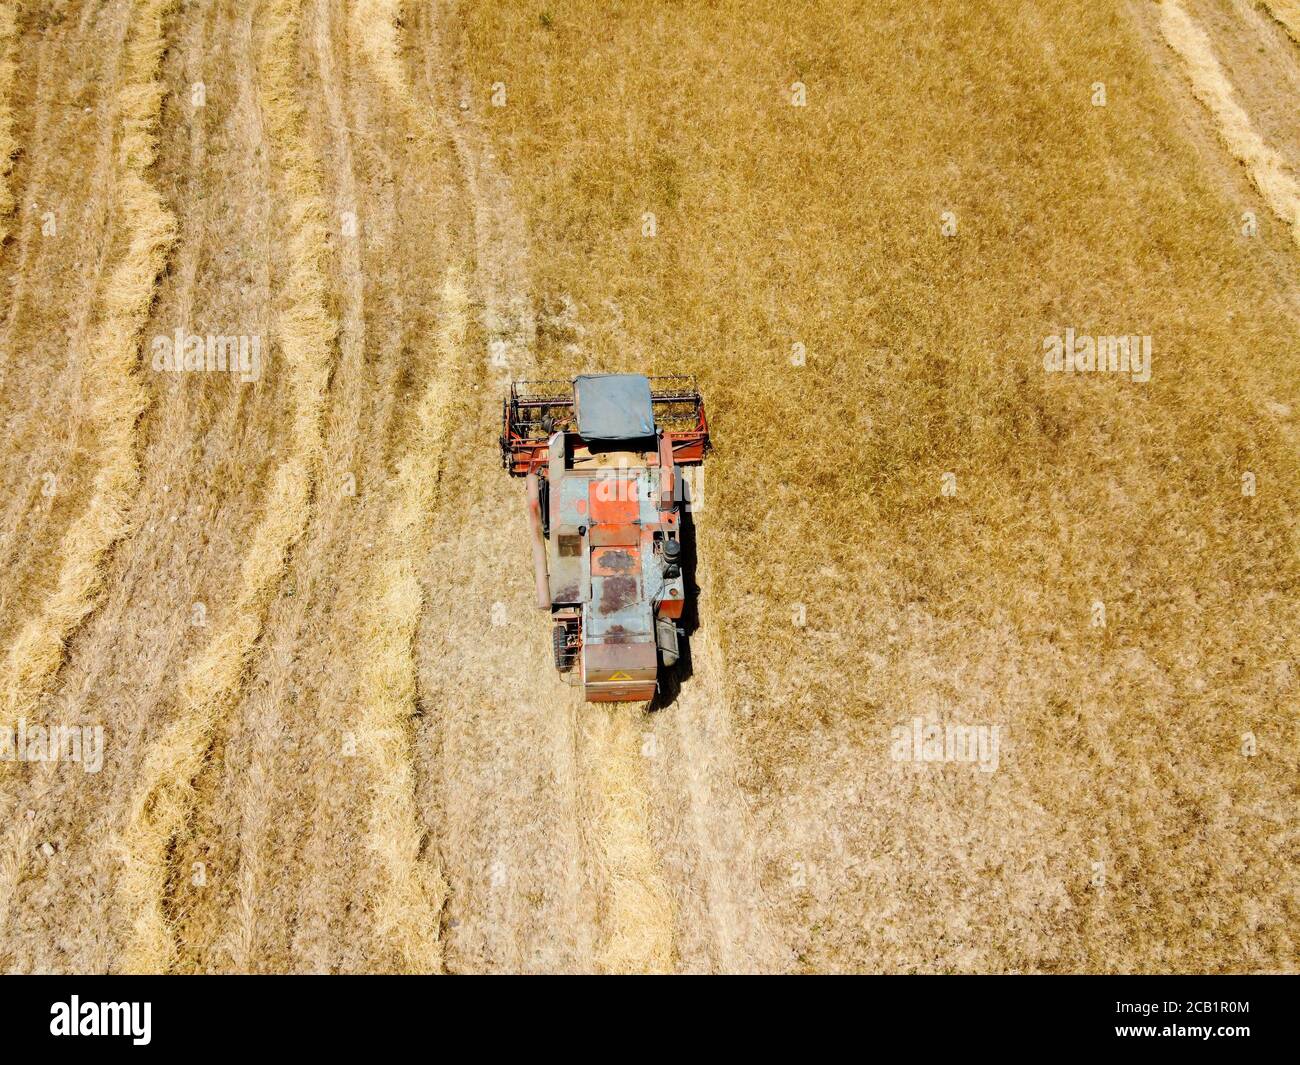 Aerial view of harvested wheat field in Turkey. Wheat harvest in the summer. Stock Photo